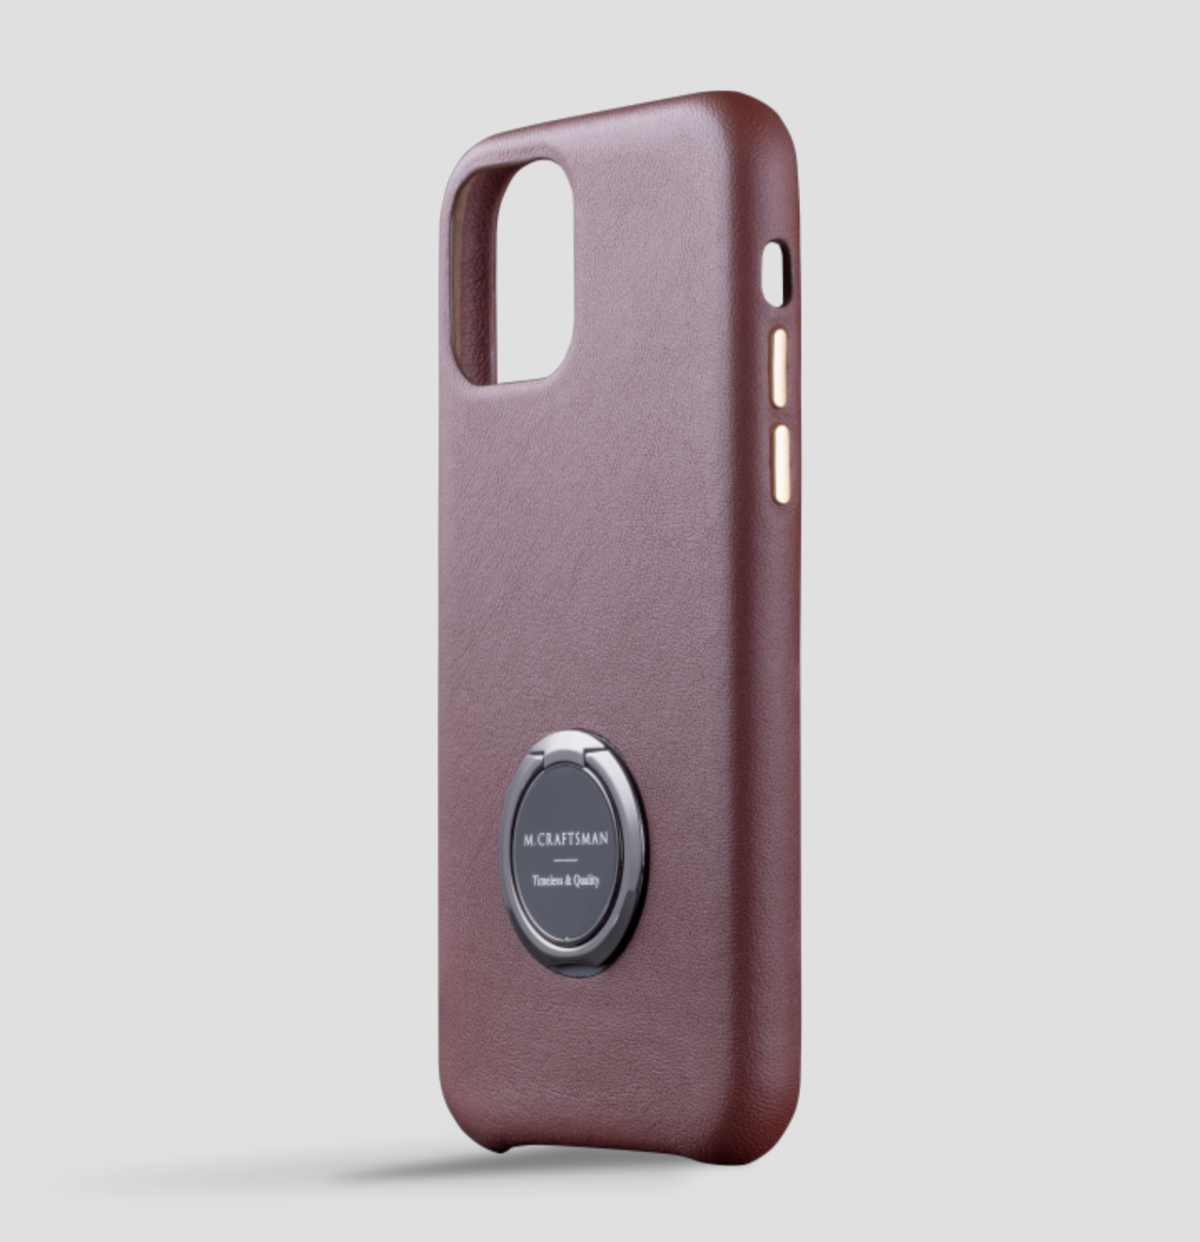 M.Craftsman WeaRing Leather Case for iPhone 11 Cases